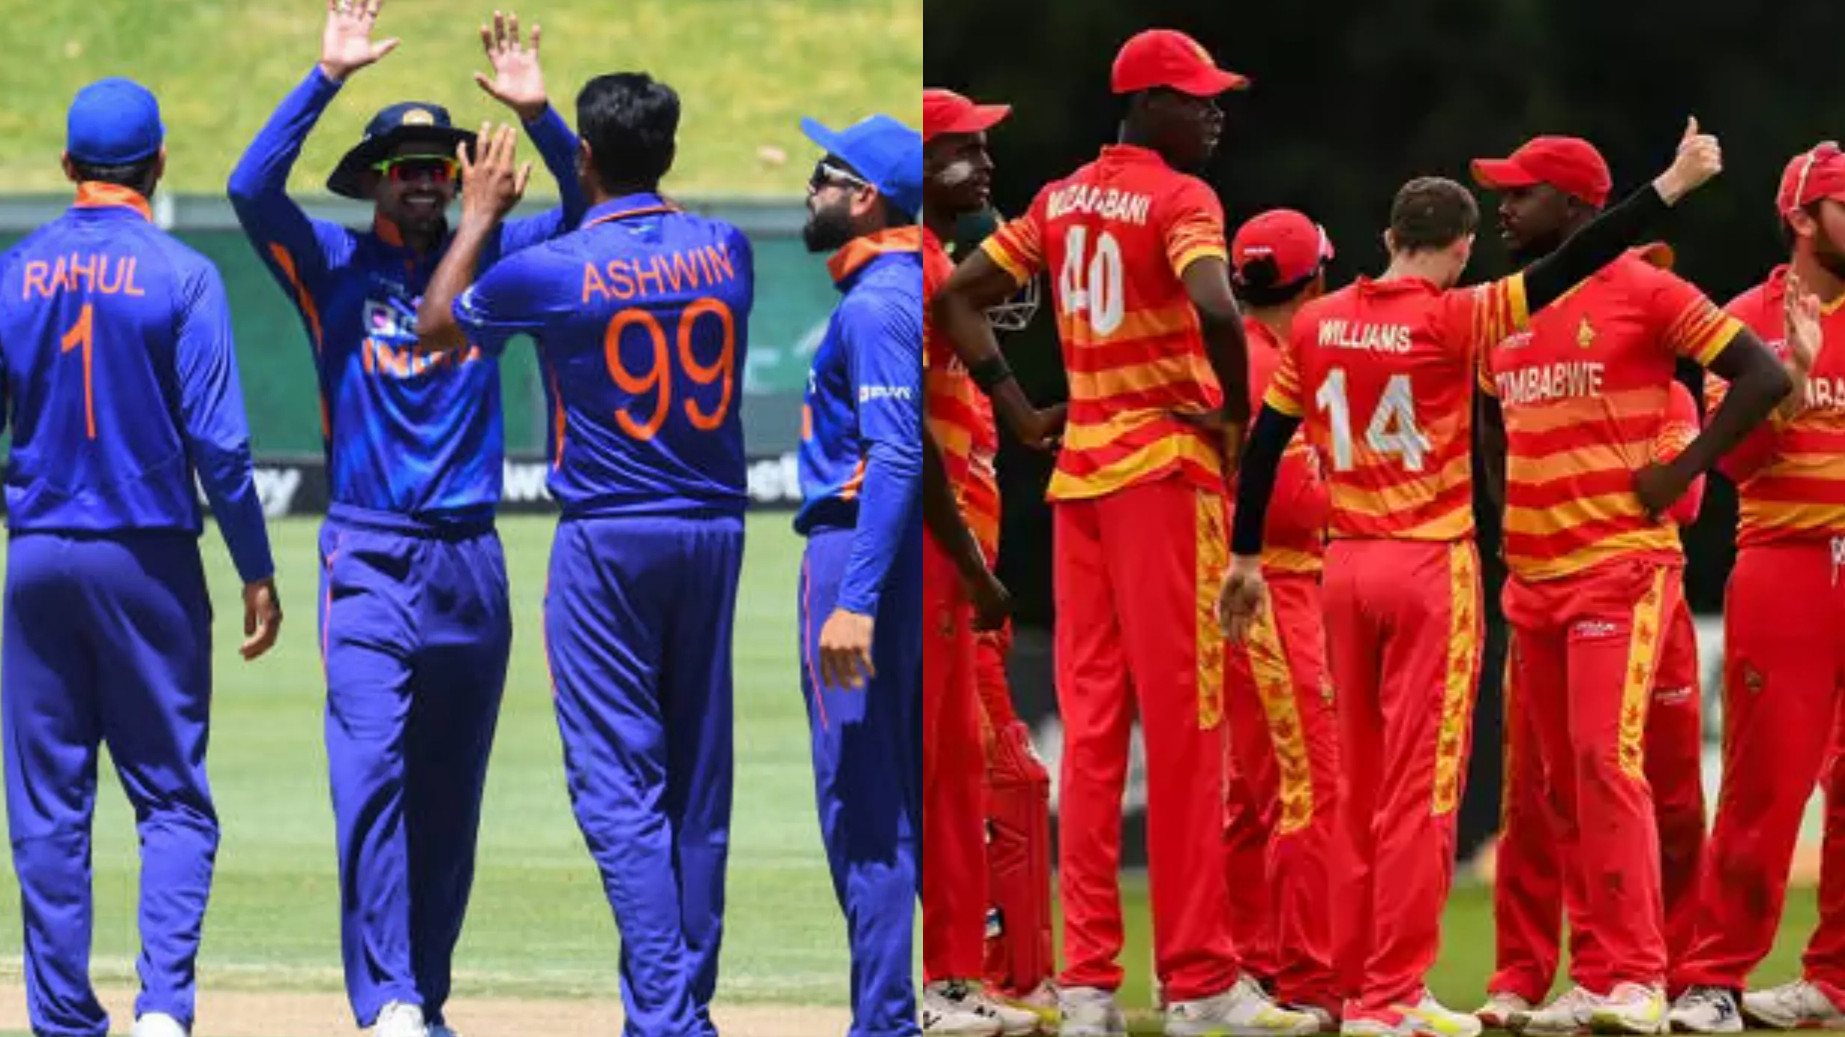 ZIM v IND 2022: Zimbabwe confirms ODI series against India in August as part of ICC Super League